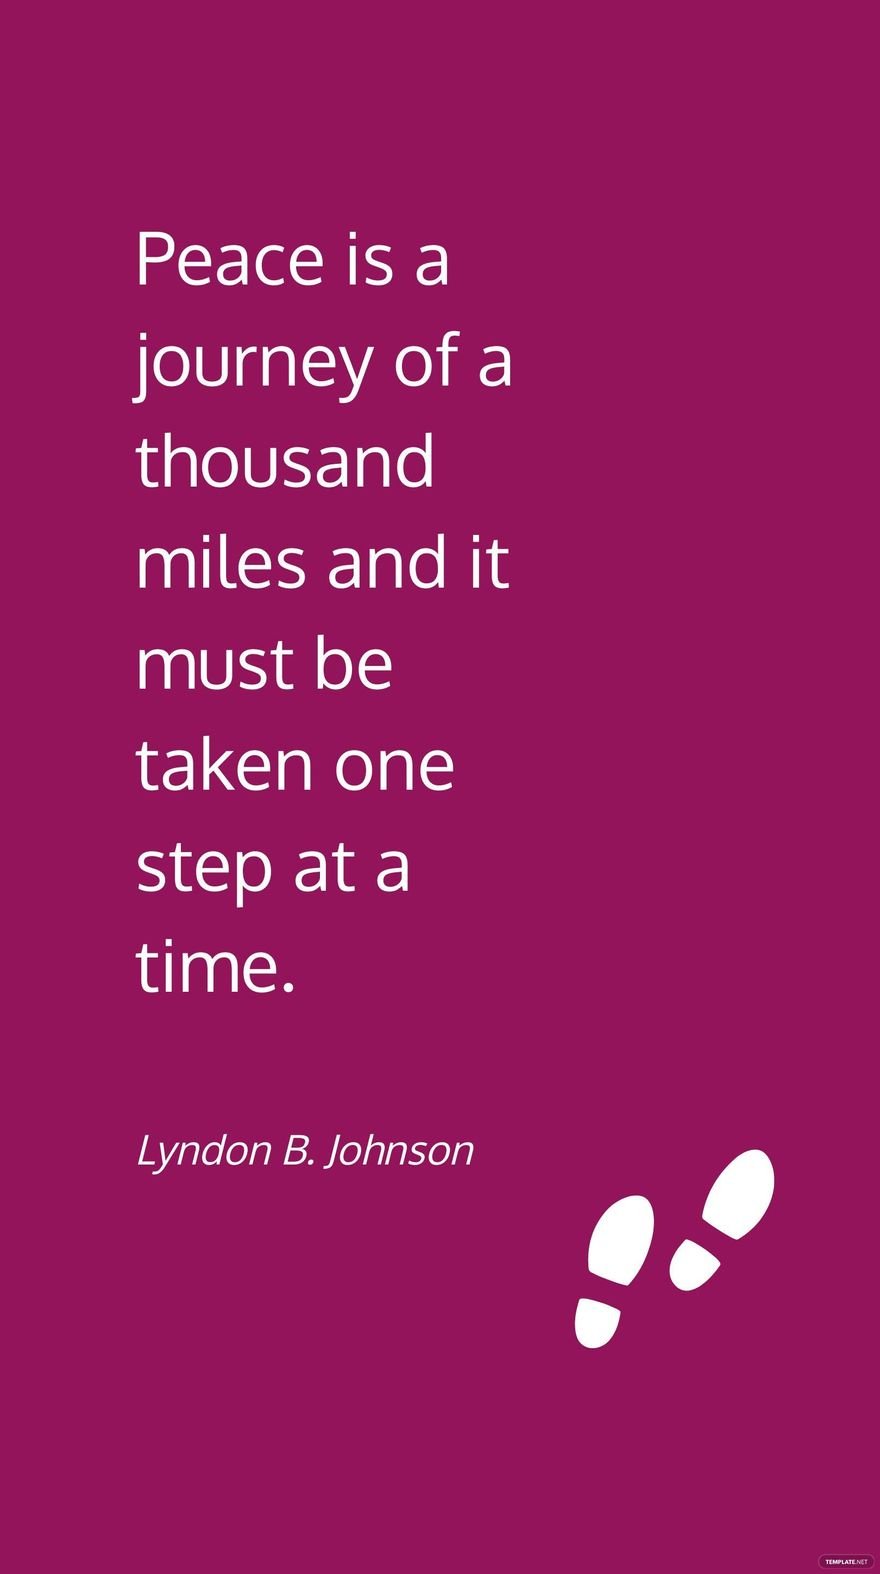 Lyndon B. Johnson - Peace is a journey of a thousand miles and it must be taken one step at a time. in JPG